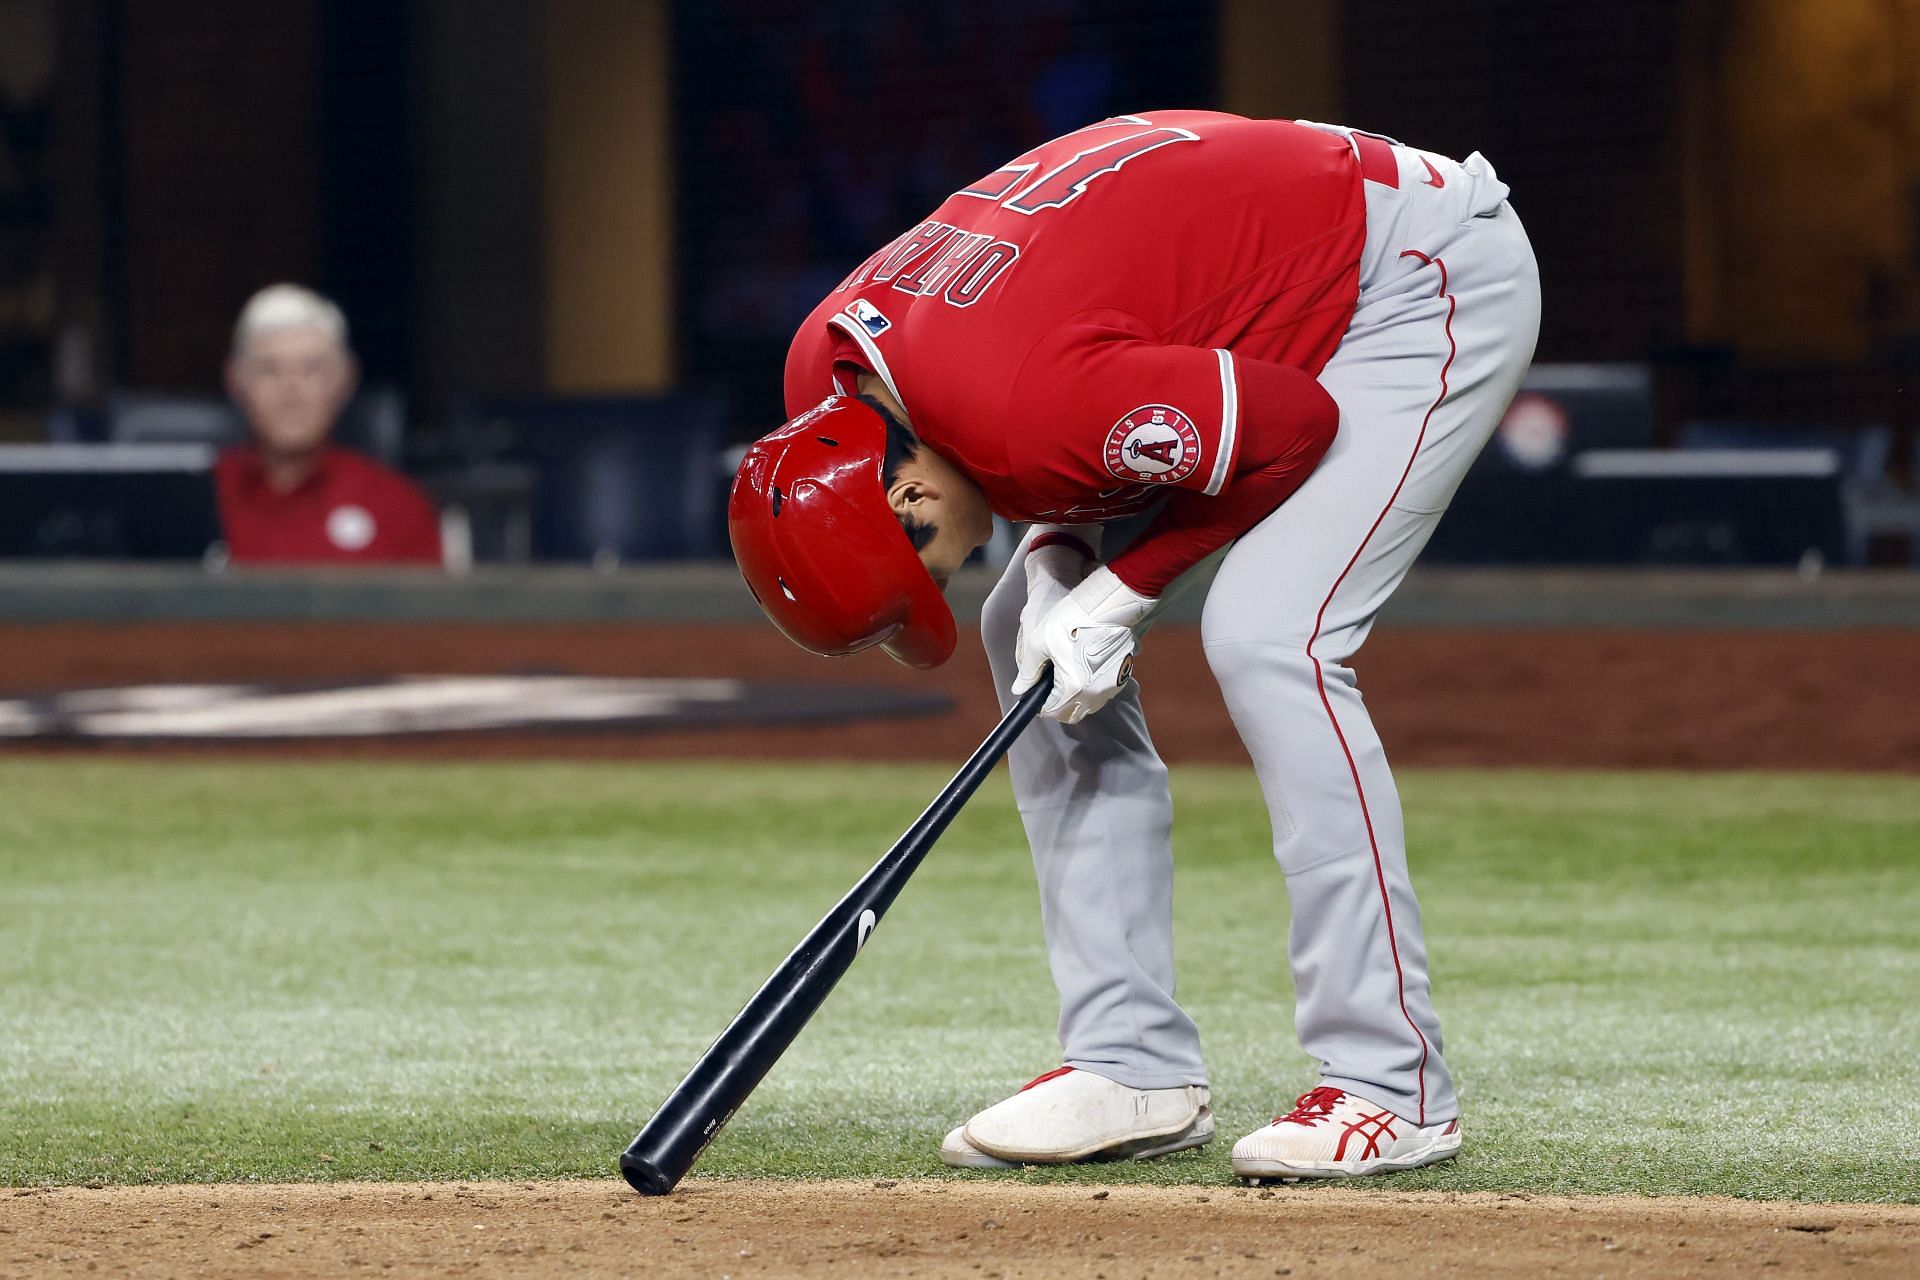 Los Angeles Angels superstar Shohei Ohtani had a two-home run game against Toronto, but it wasn&#039;t enough to come away with the win.